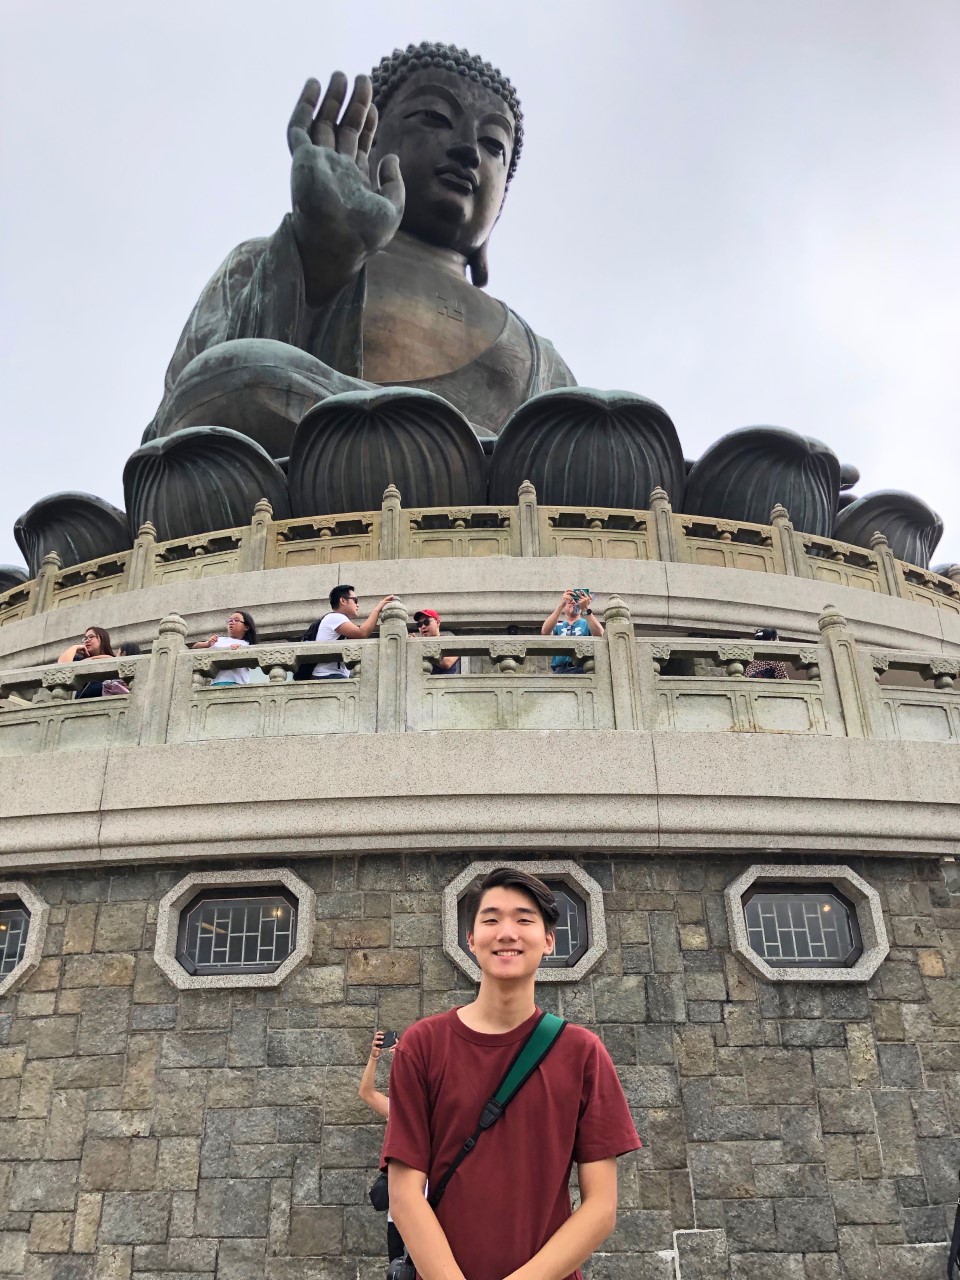 A young Asian male stands in front of a large statue of Buddha